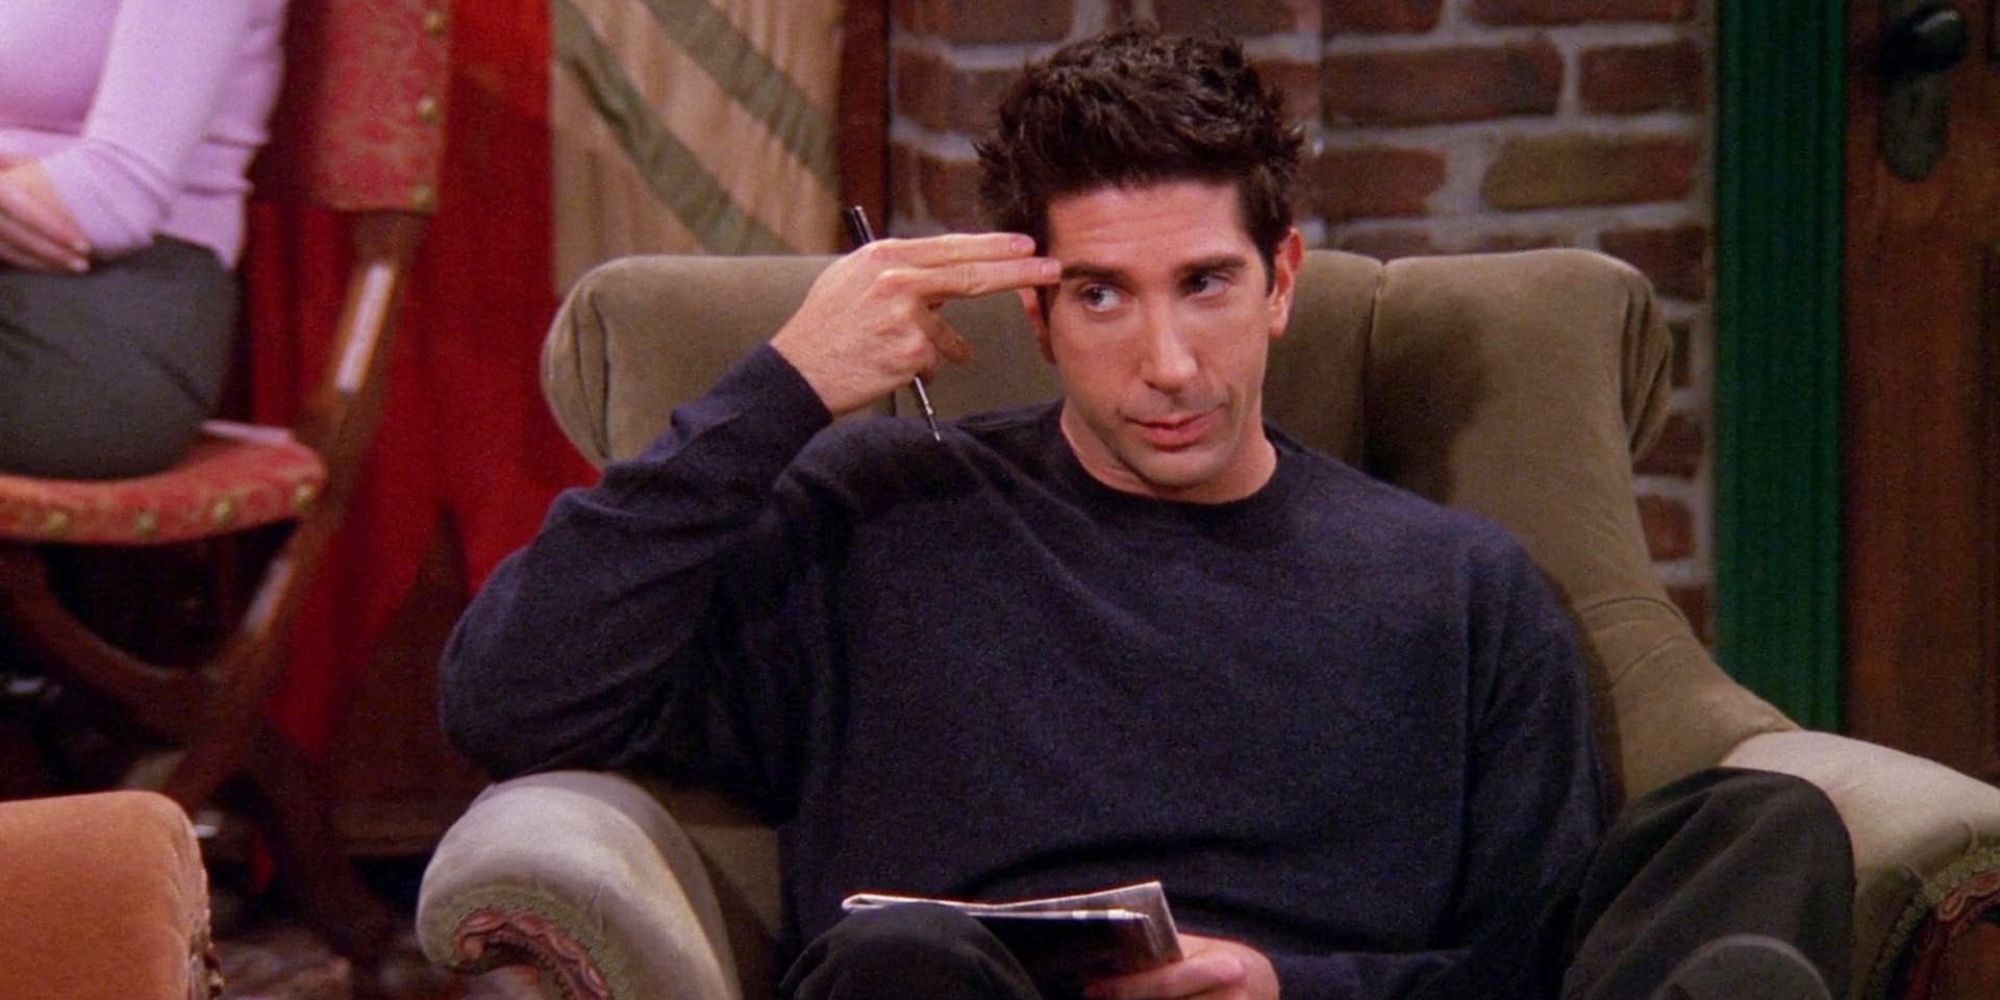 Jennifer Aniston Channels Ross from Friends with This Iconic Wardrobe Staple